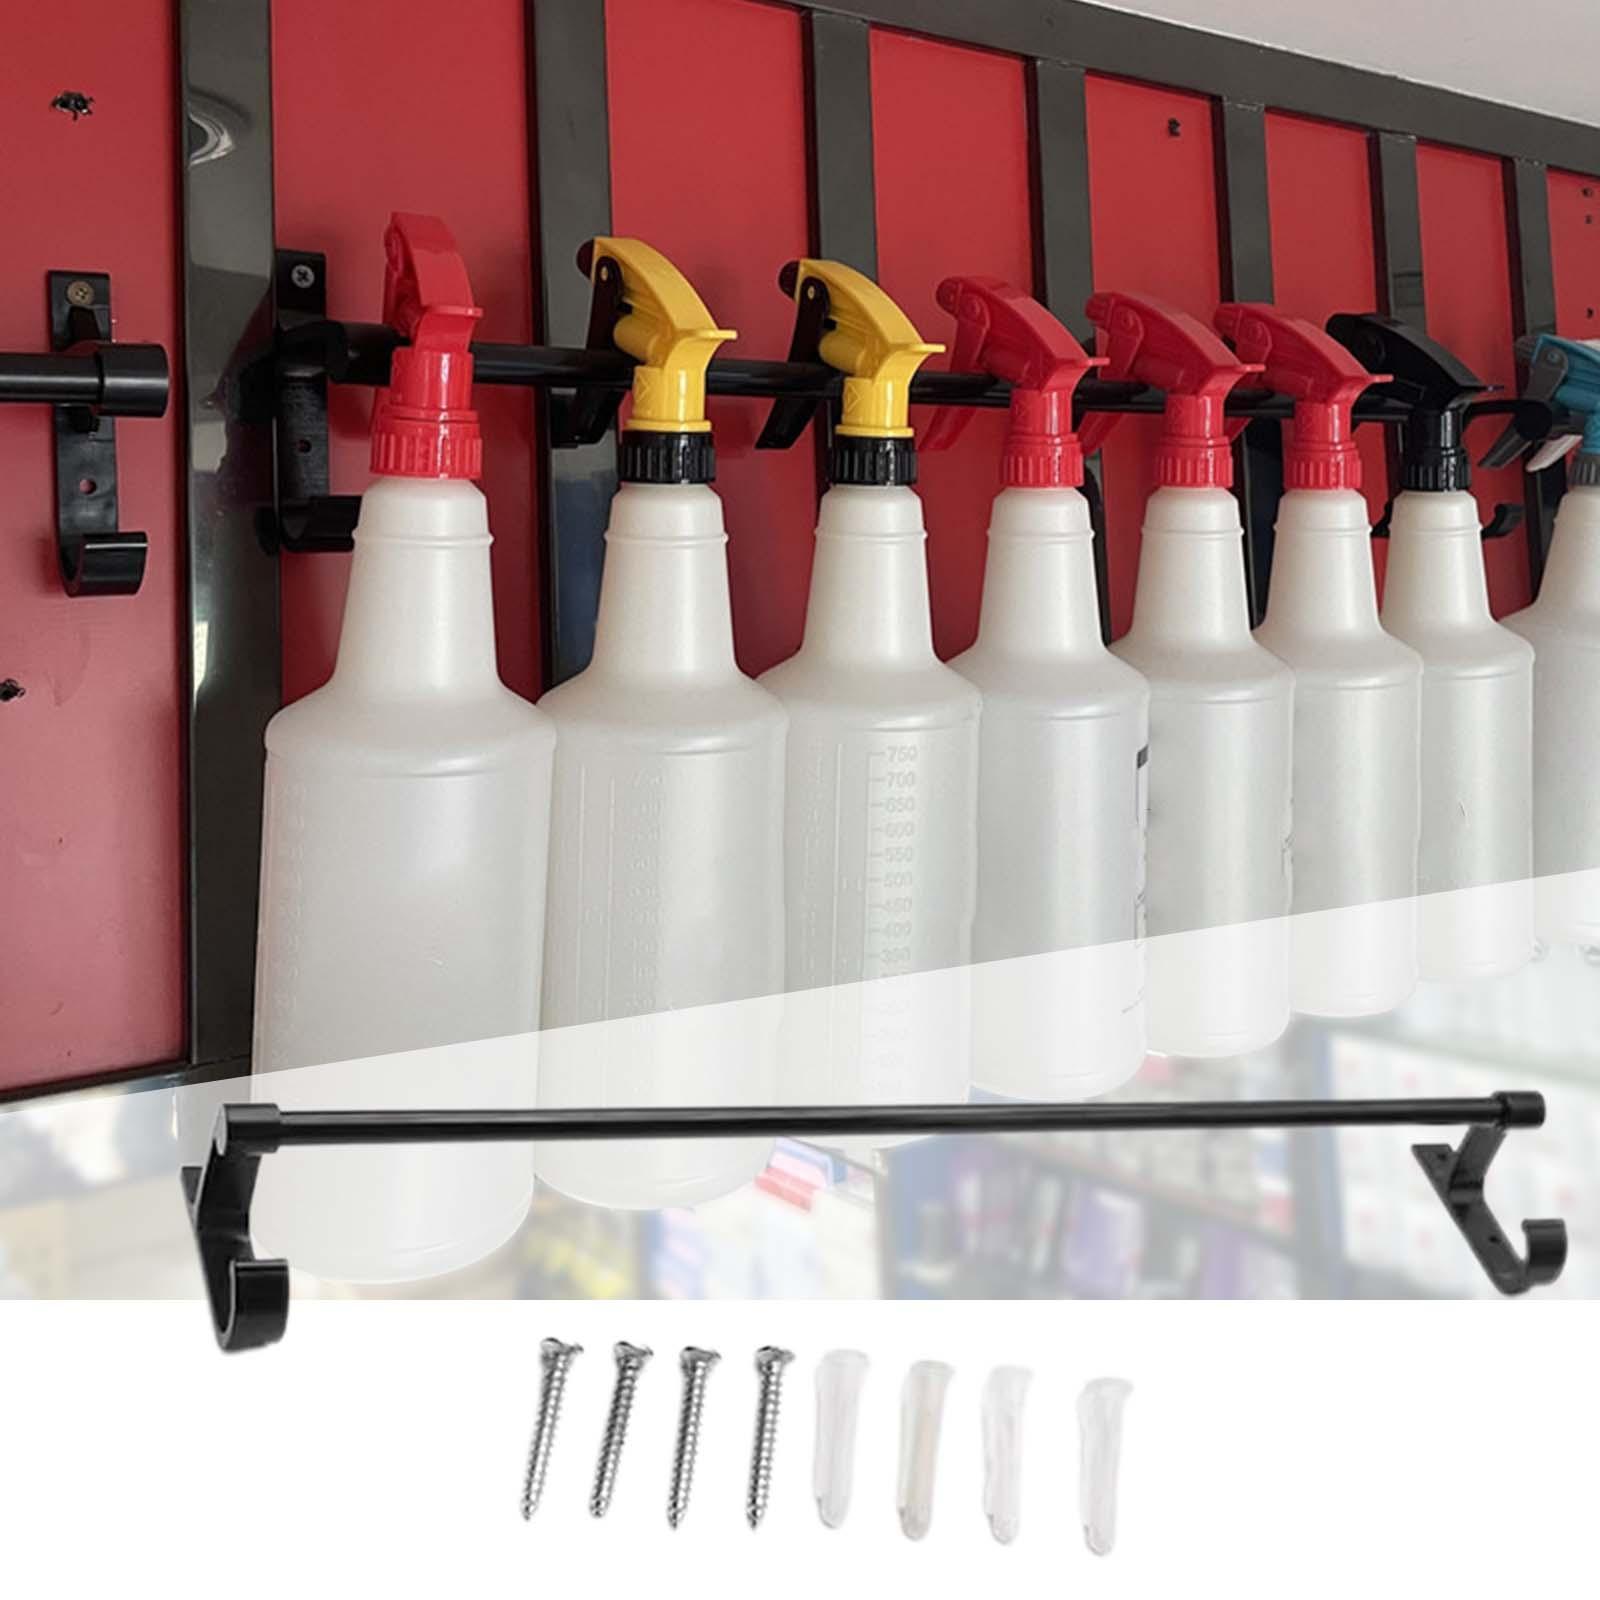 Spray Bottle Hanging Holder Wall Mounted for Garage Workplace Watering Cans